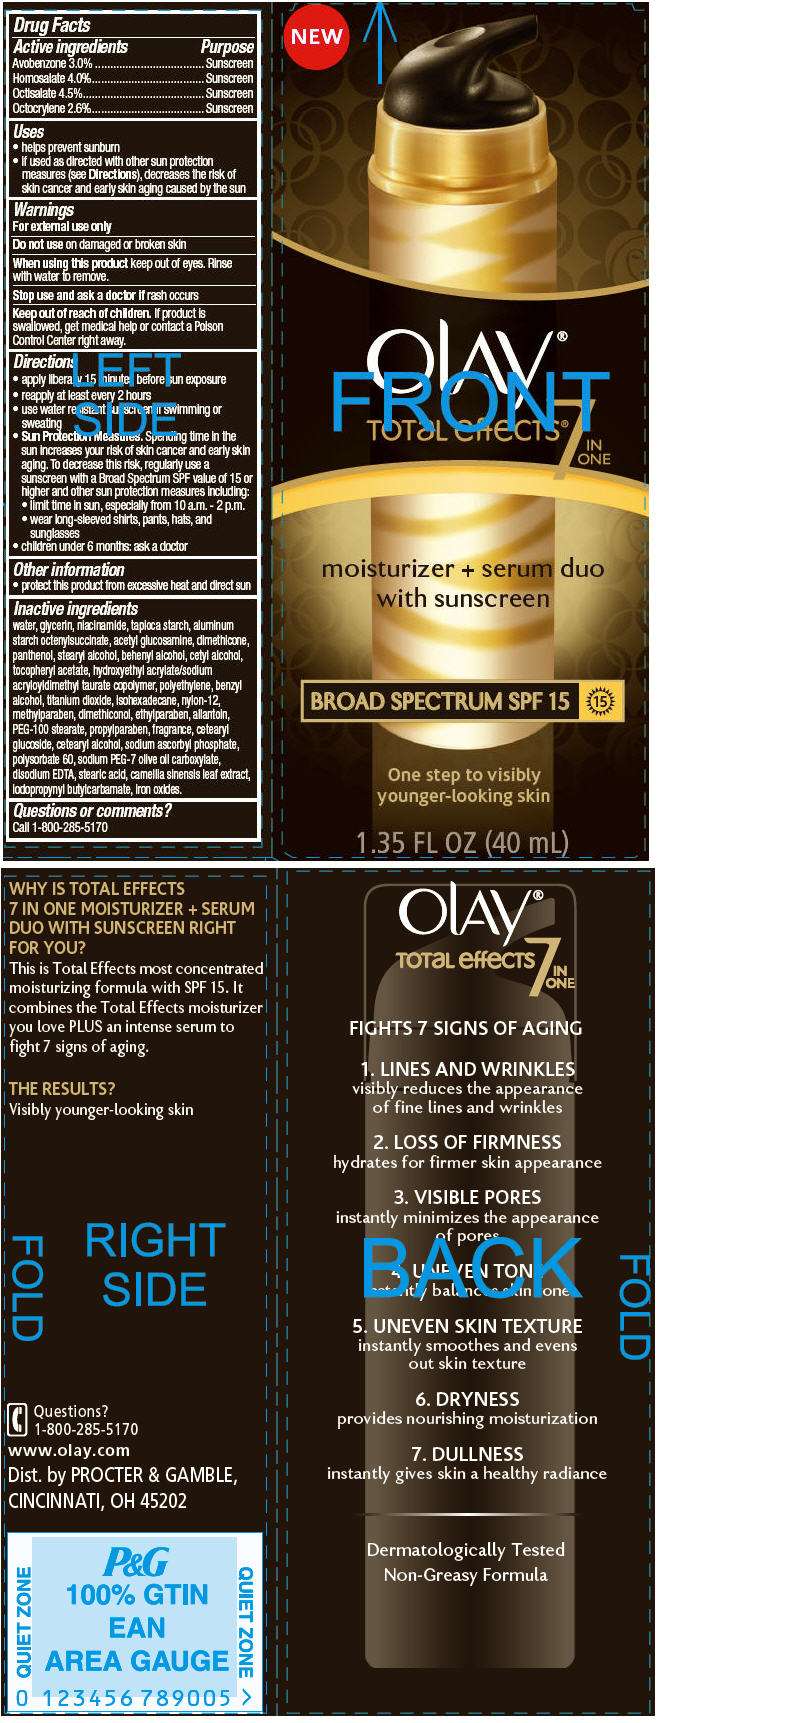 Olay Total Effects Moisturizer Plus Serum Duo